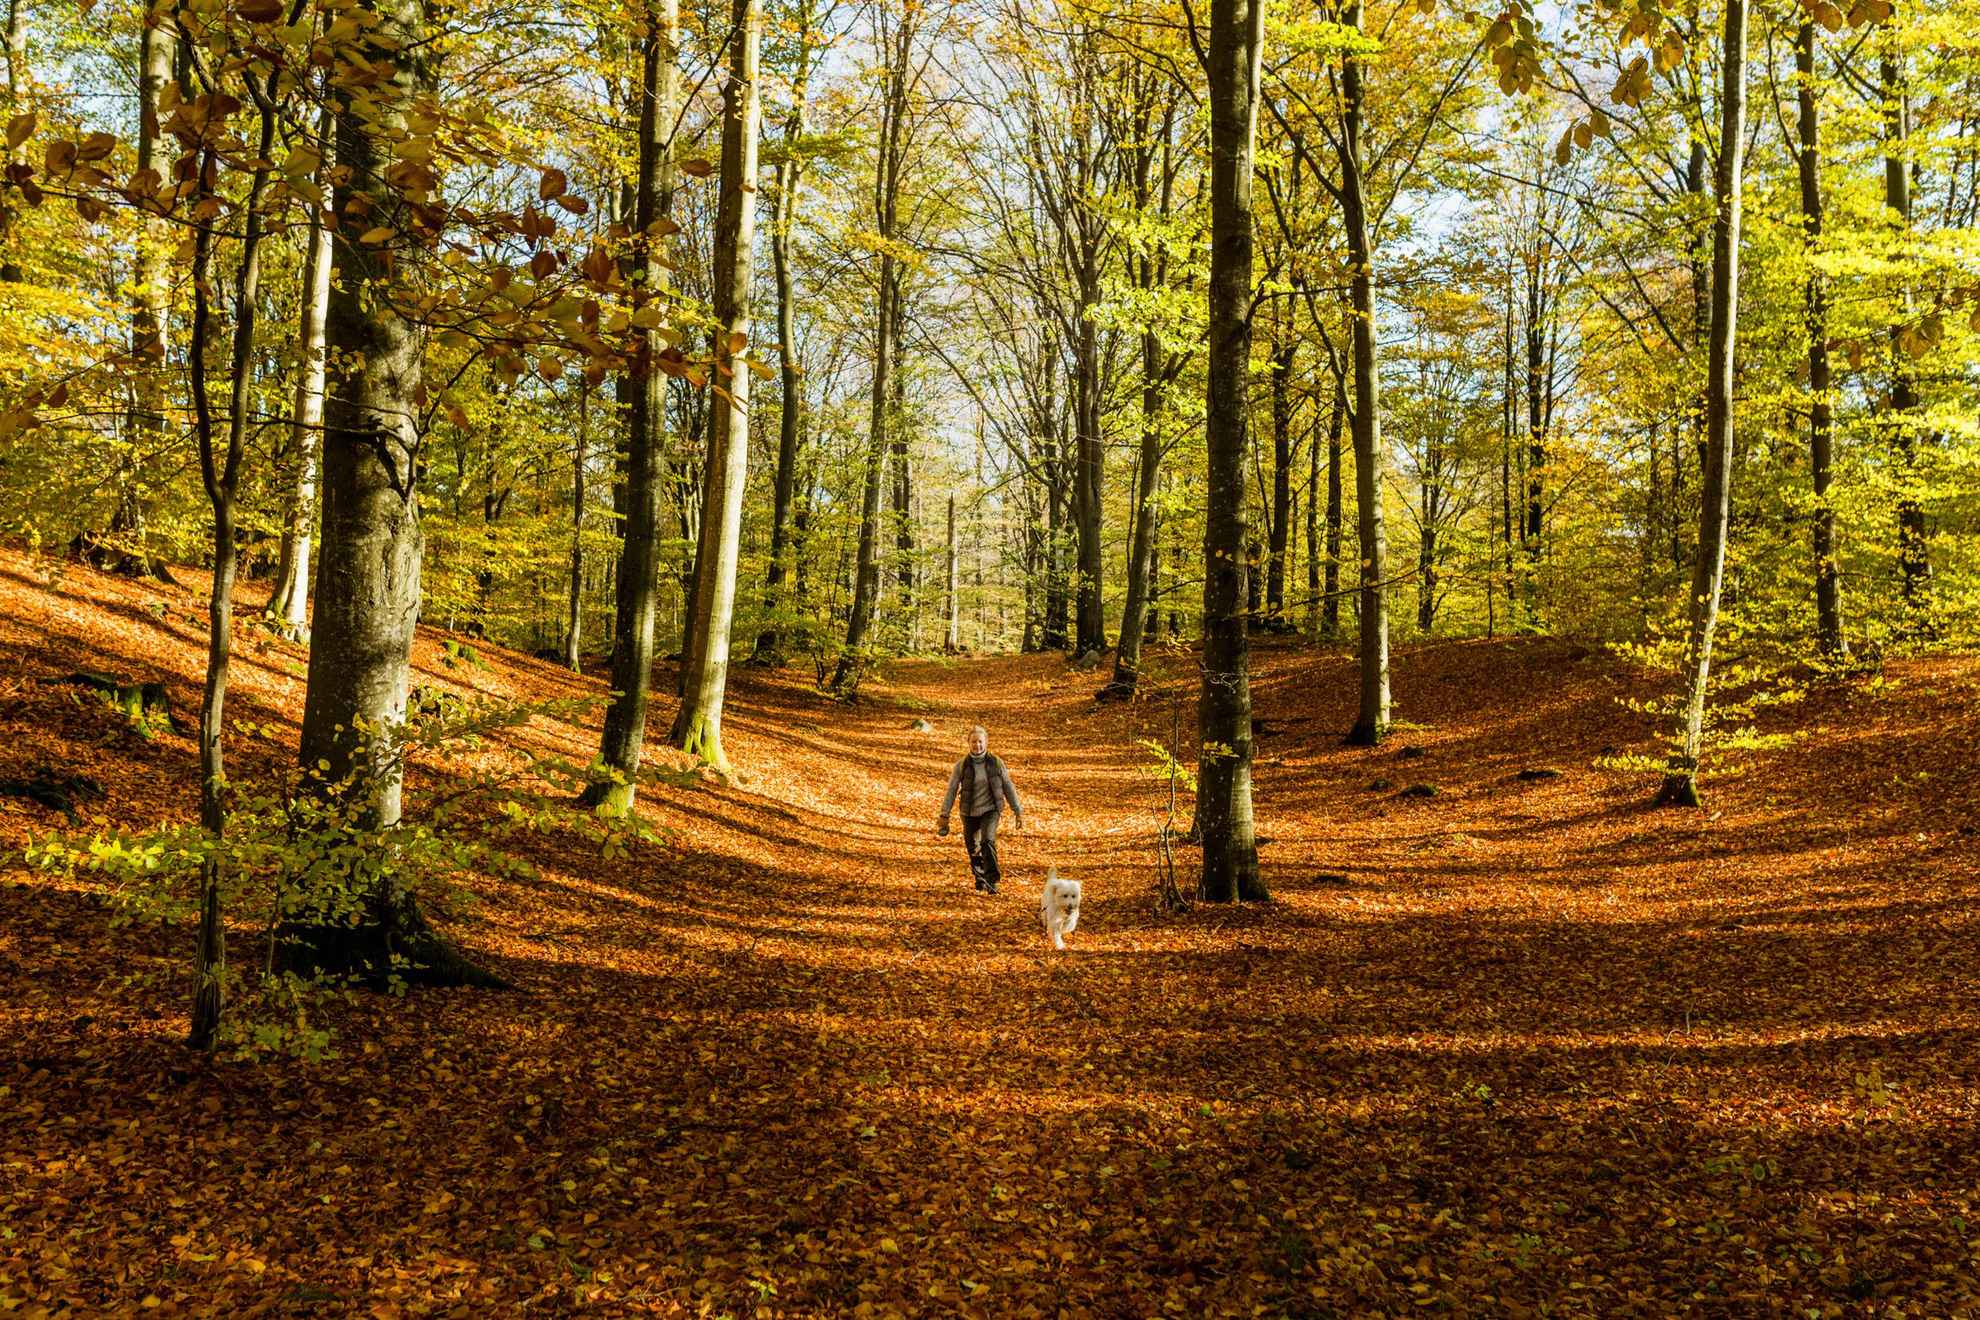 A woman with a dog are hiking on a trail in a forest at autumn. The sun is shining and the ground is covered with orange leaves.